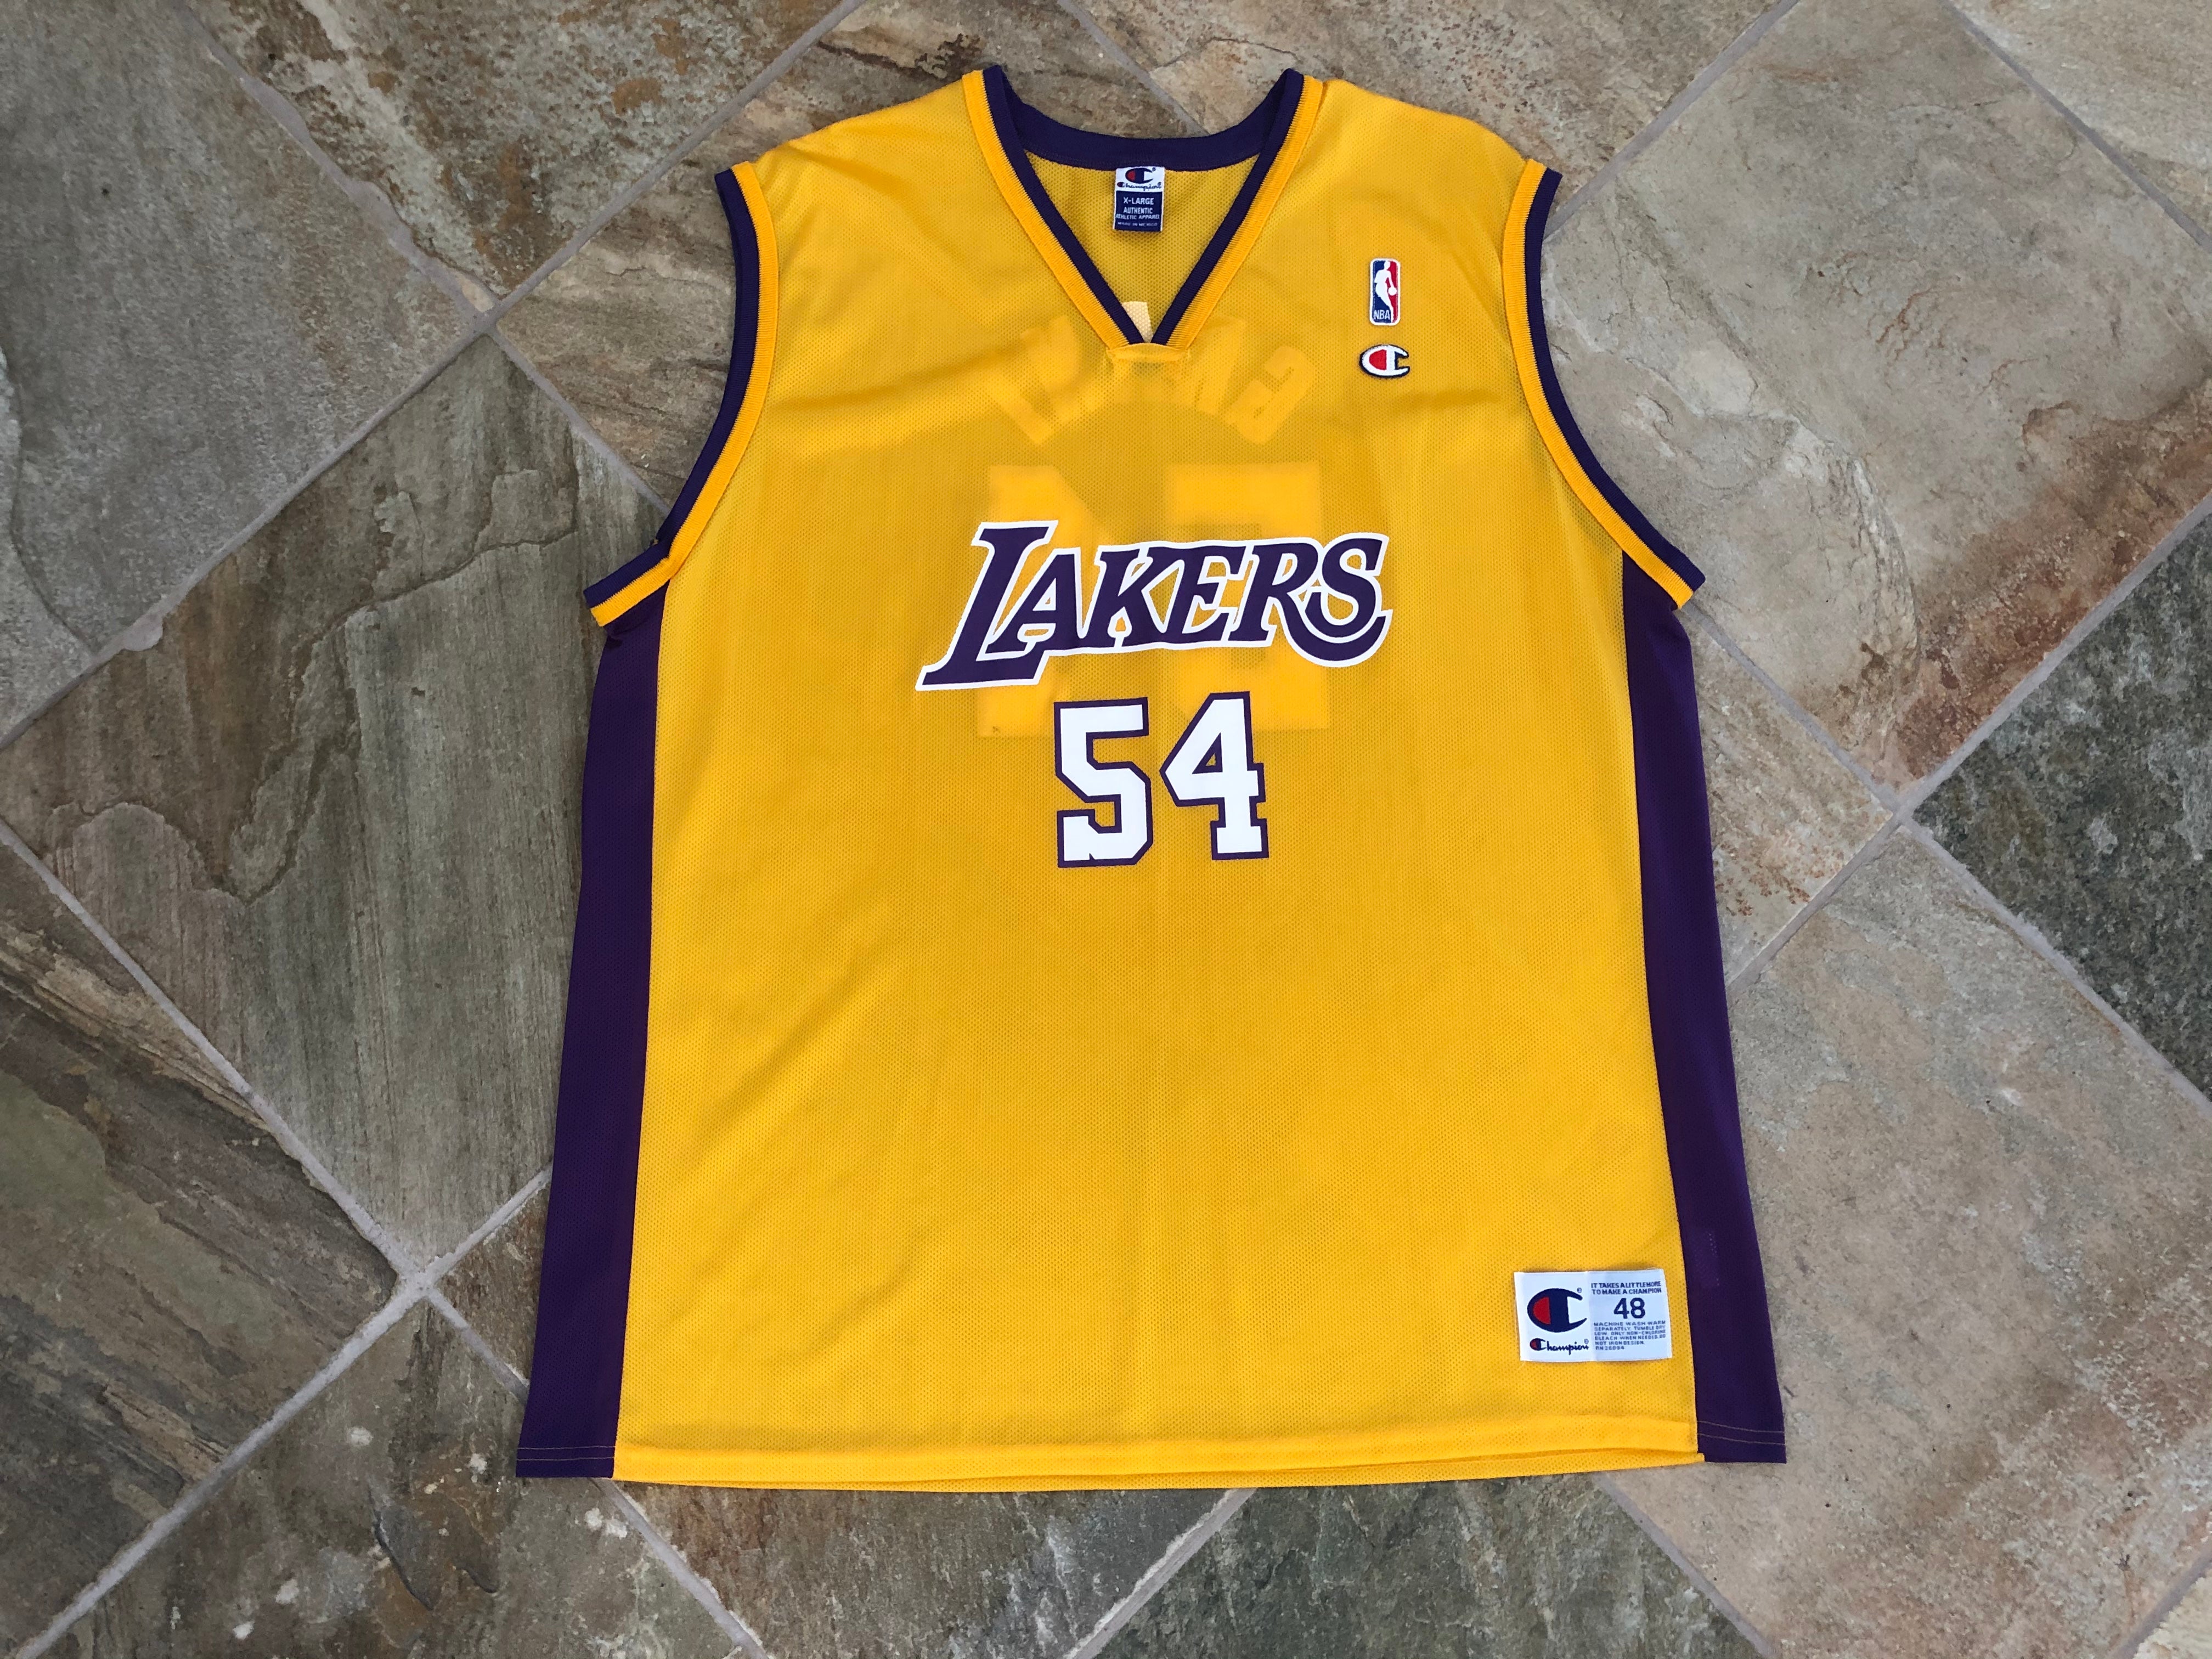 lakers number 48 jersey